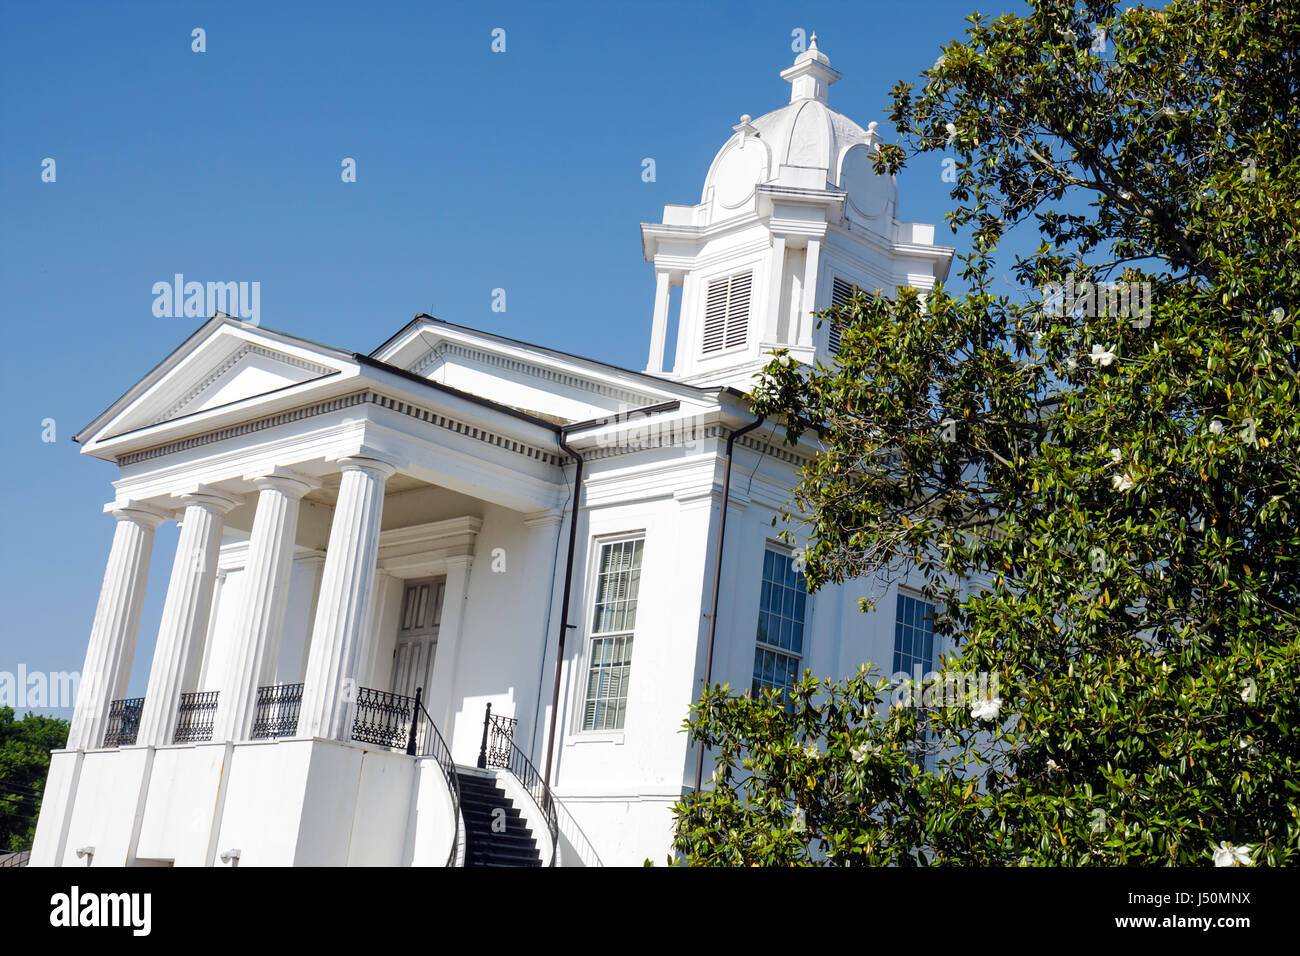 Alabama, Lowndes County, Hayneville, Lowndes County Courthouse, AL080521046 Stockfoto